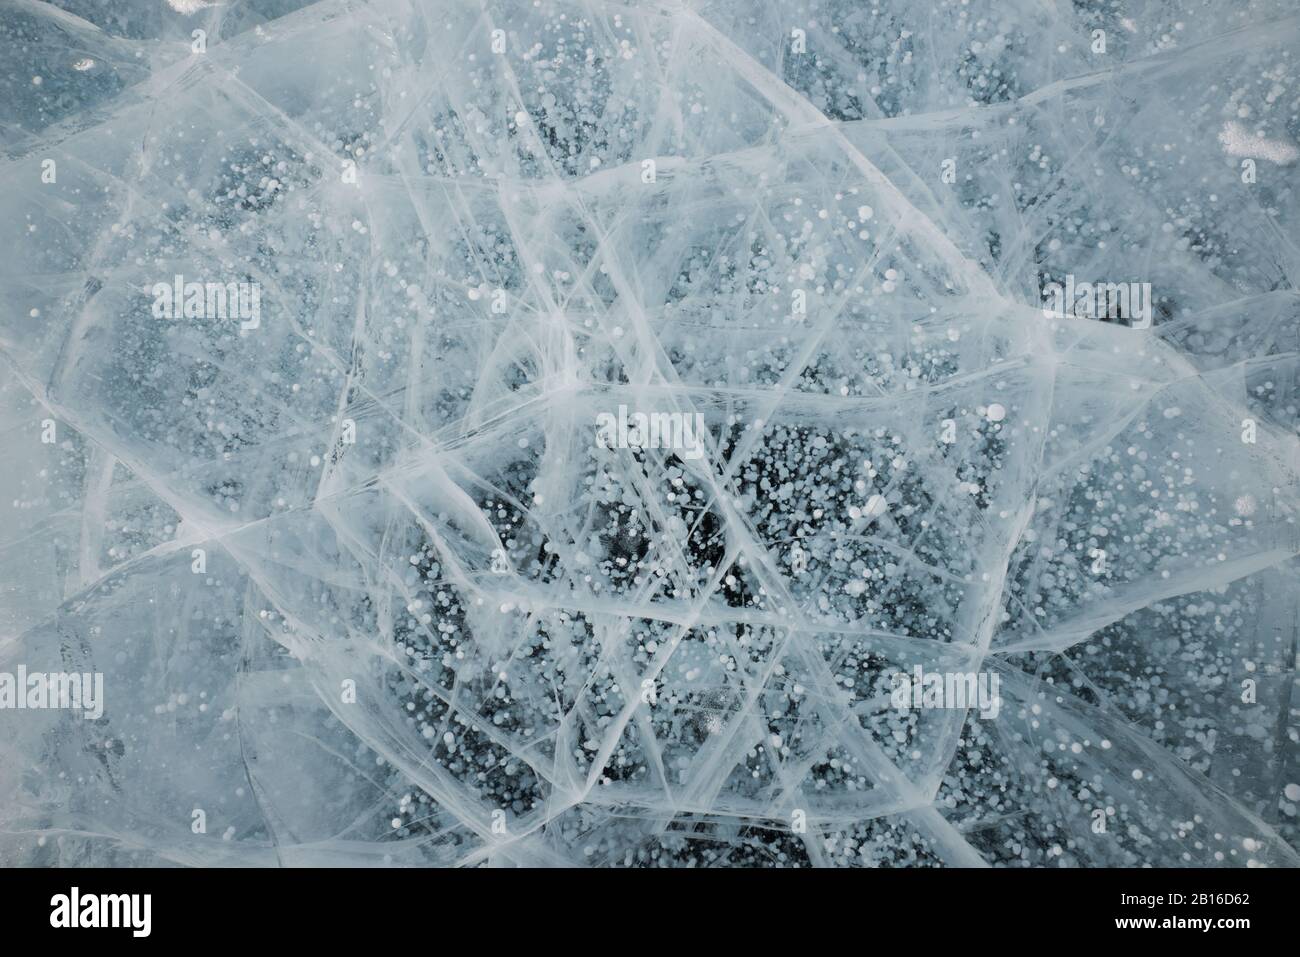 Polygonal structures of ice on Baikal Stock Photo